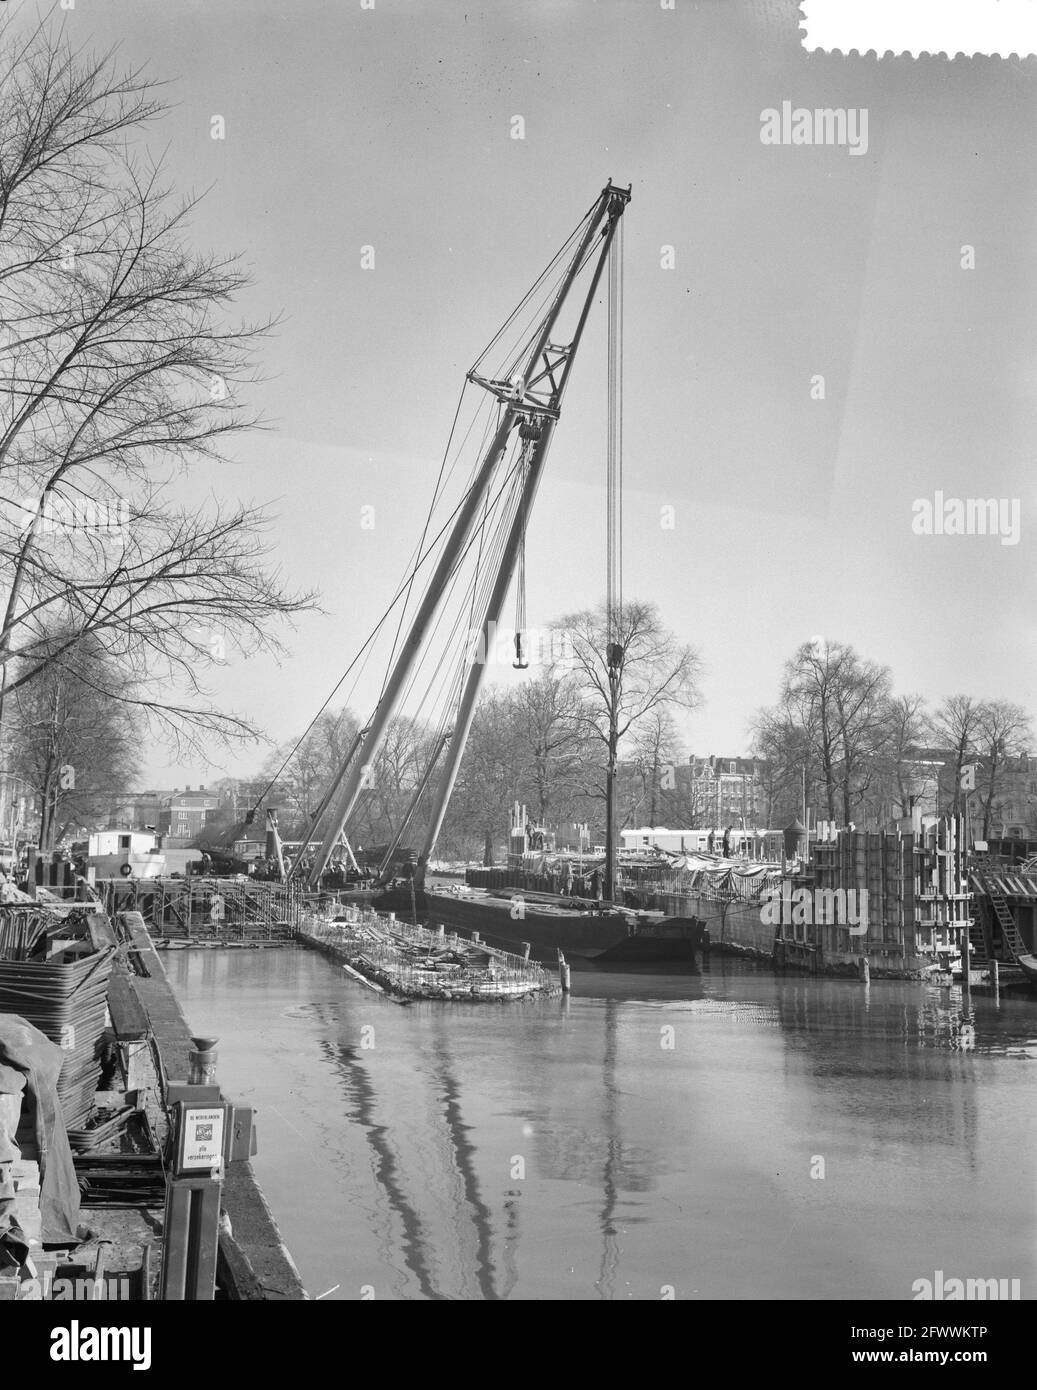 Amsterdam builds and demolishes in the inner city, February 17, 1960, inner cities, construction, The Netherlands, 20th century press agency photo, news to remember, documentary, historic photography 1945-1990, visual stories, human history of the Twentieth Century, capturing moments in time Stock Photo